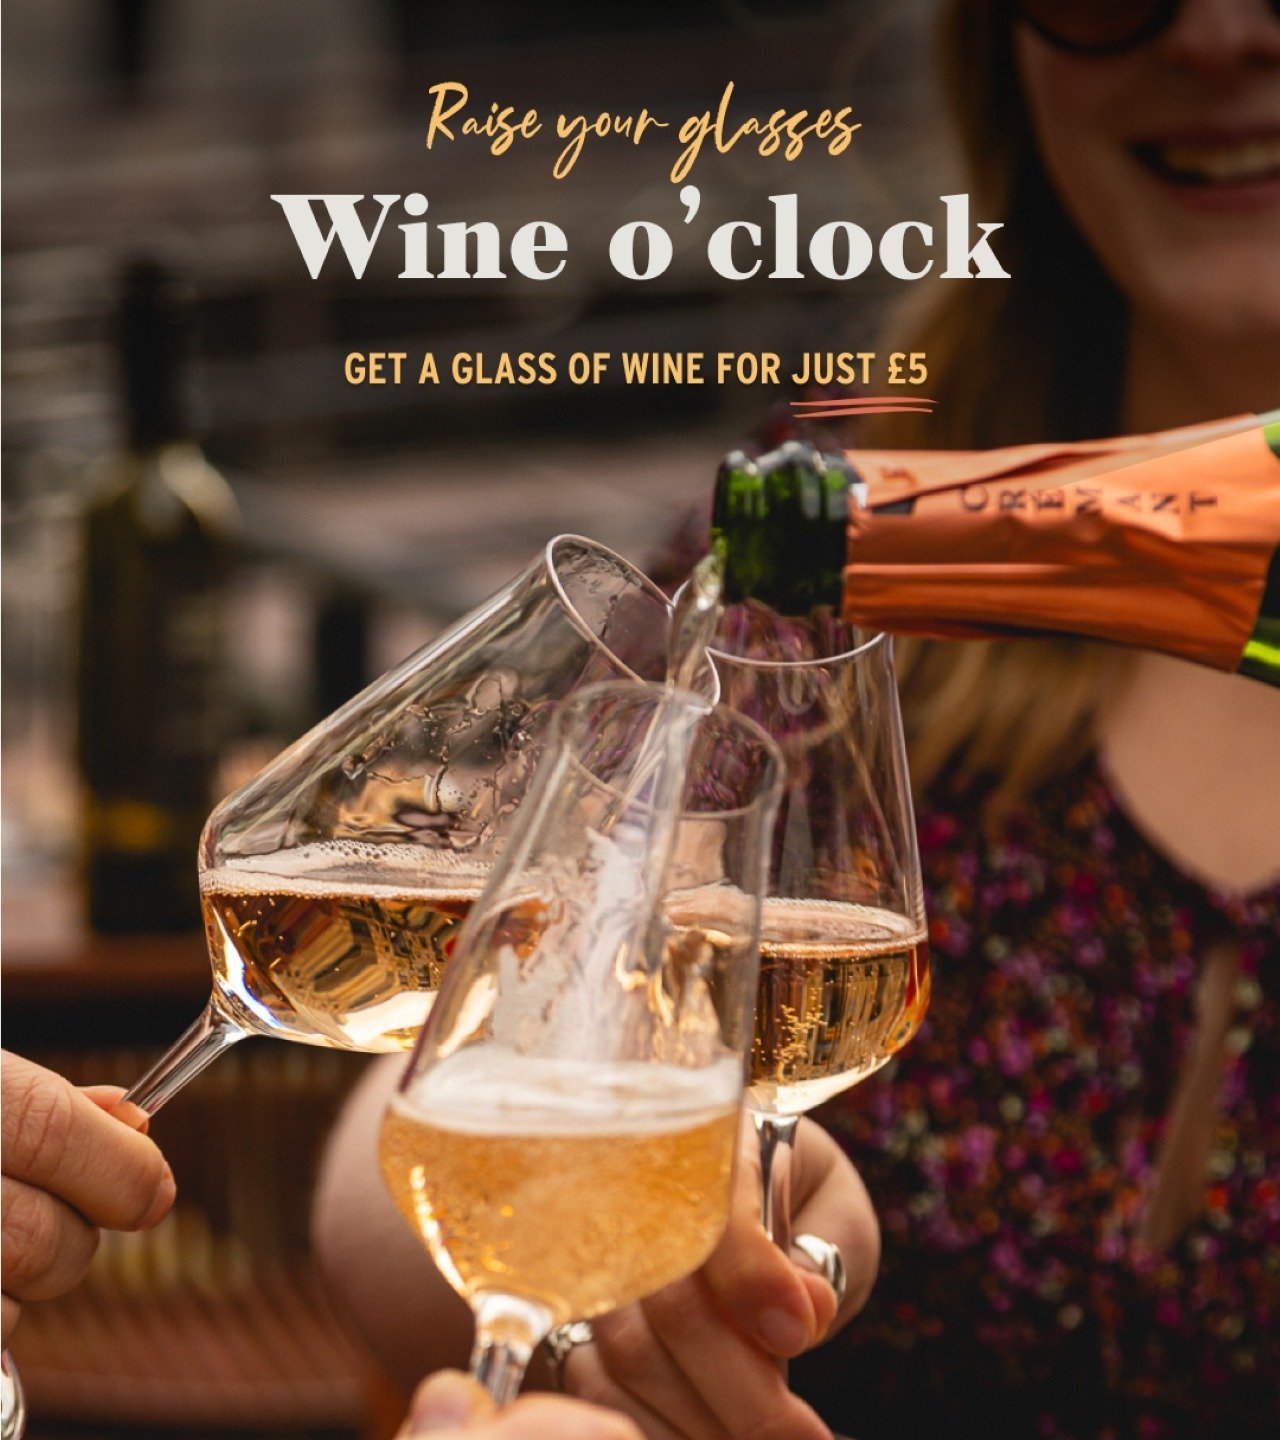 Sick of London prices giving your wallet a run for its money? 

Say hello to Wine O'Clock - where your bank account finally gets to breathe a sigh of relief! Join us for a happy hour that won't leave you feeling broke, even if payday feels lightyears